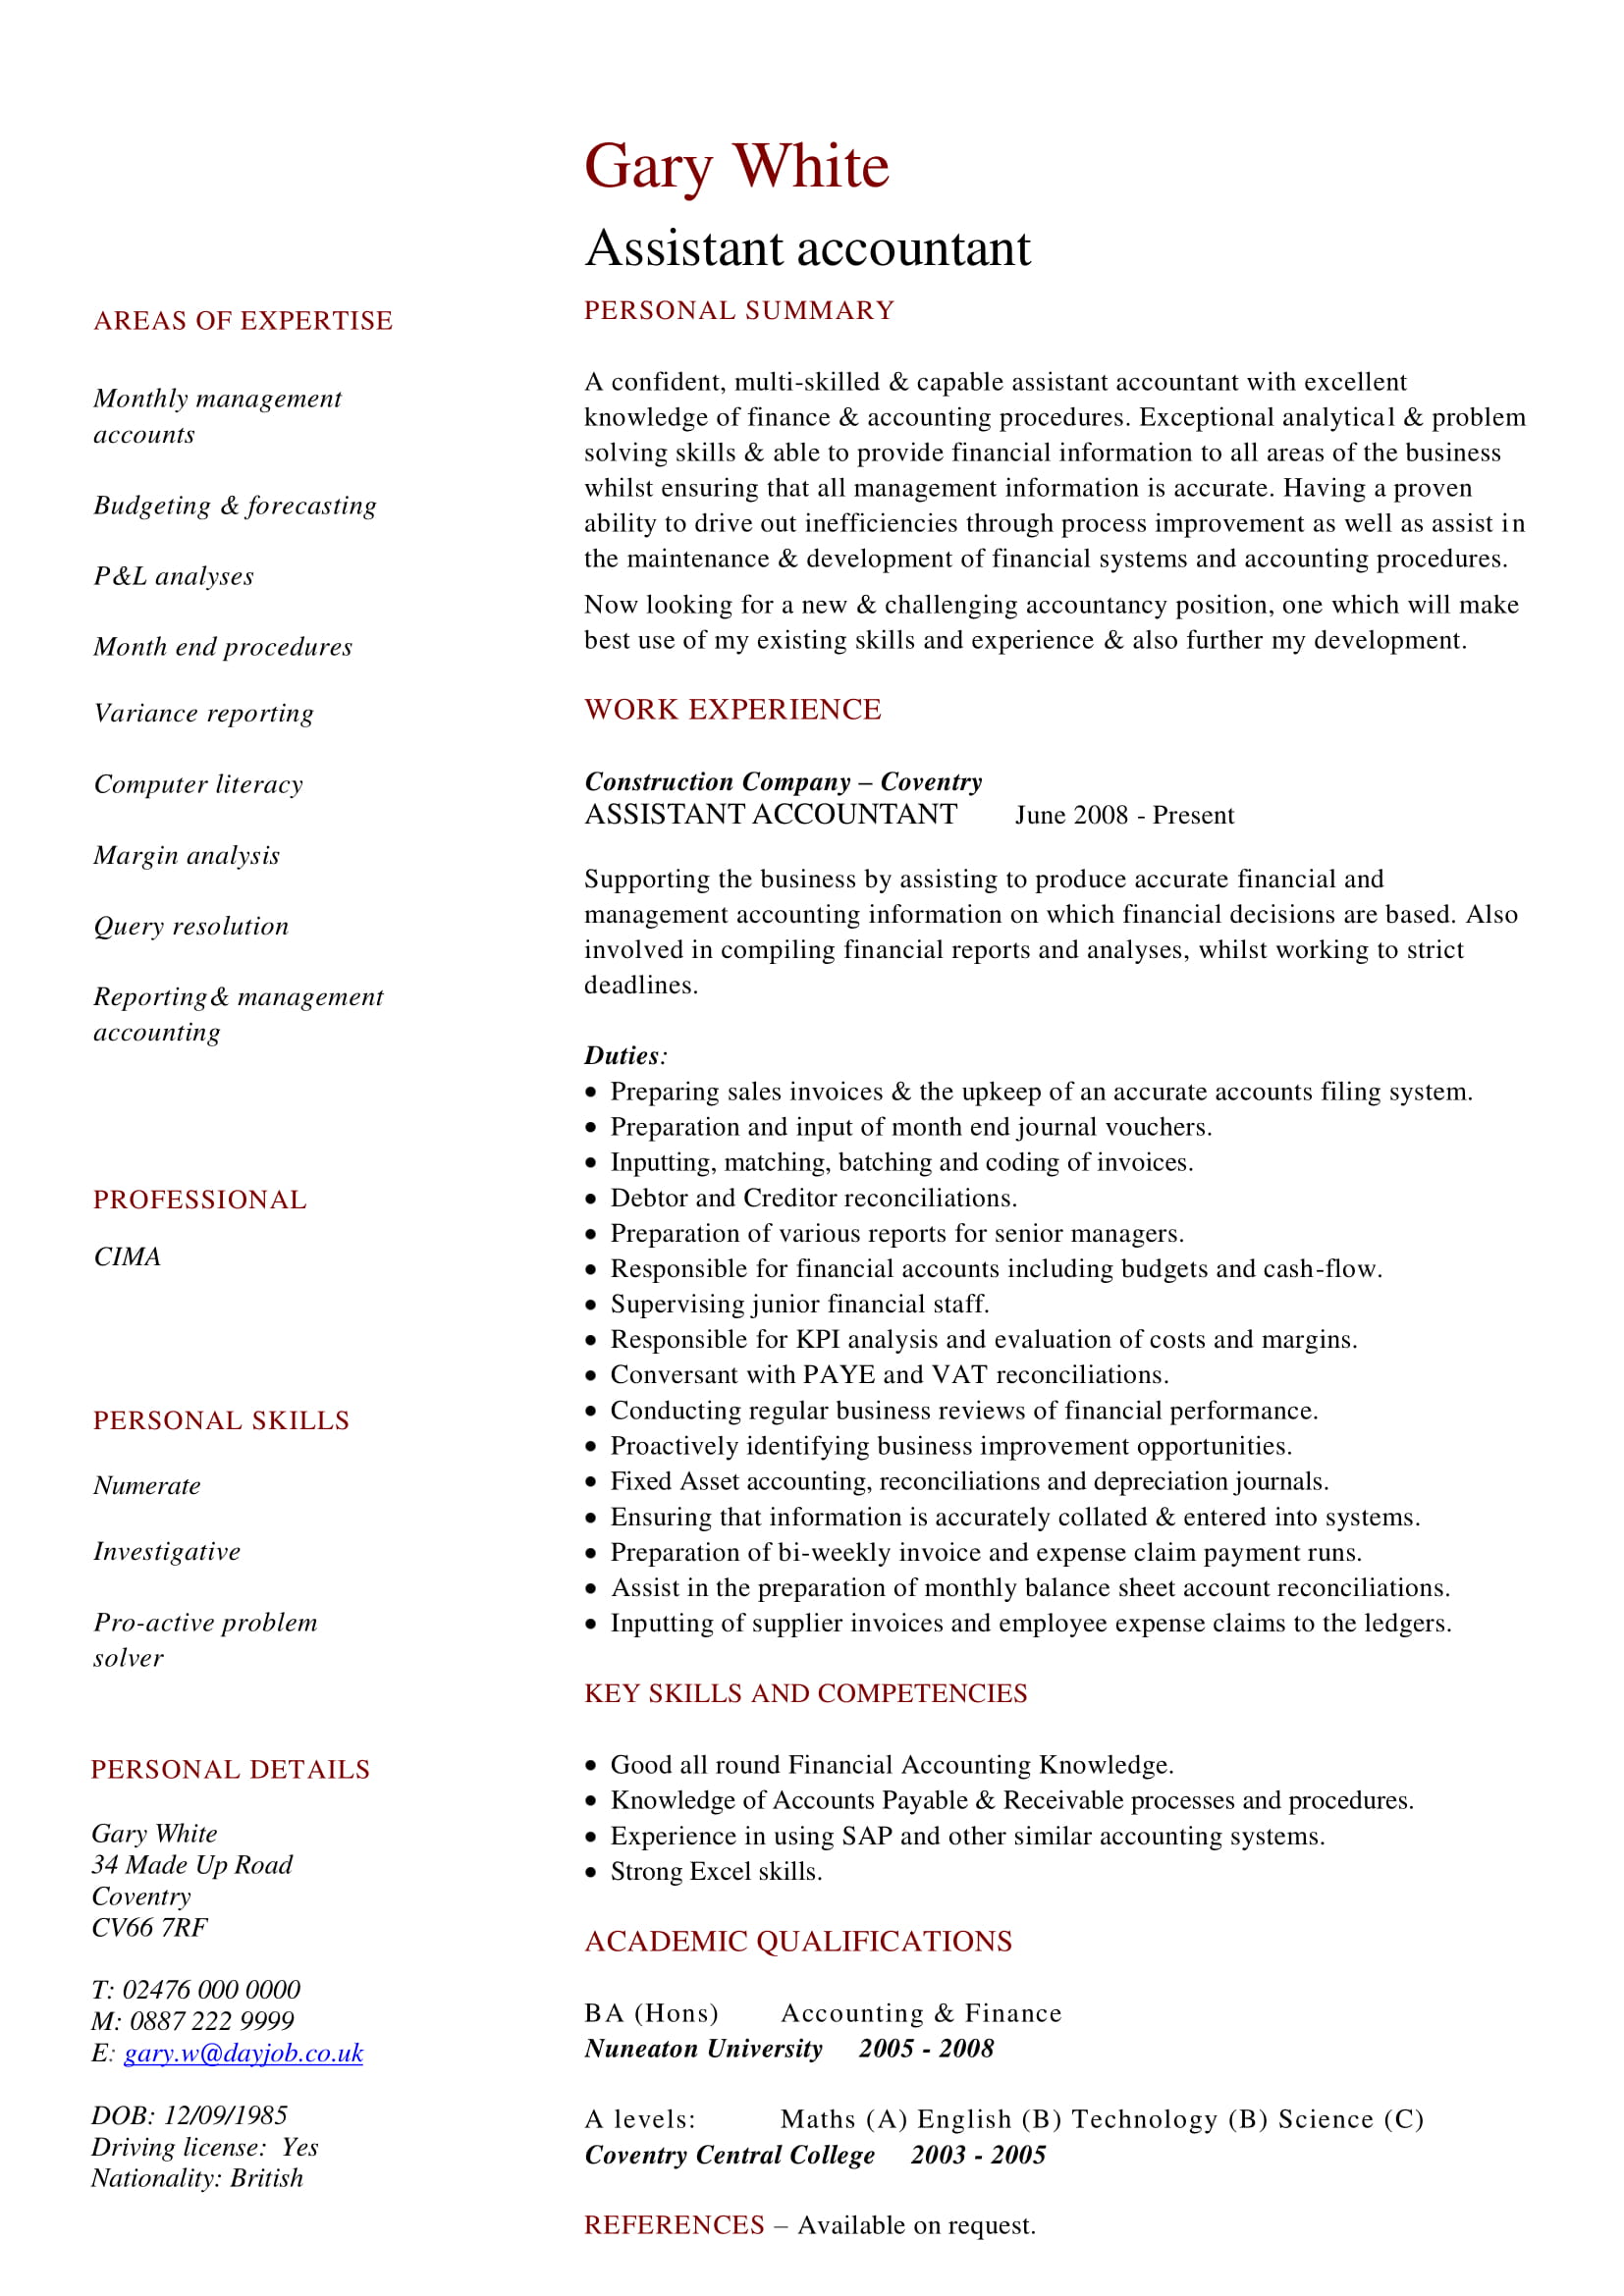 research summary for industry job application